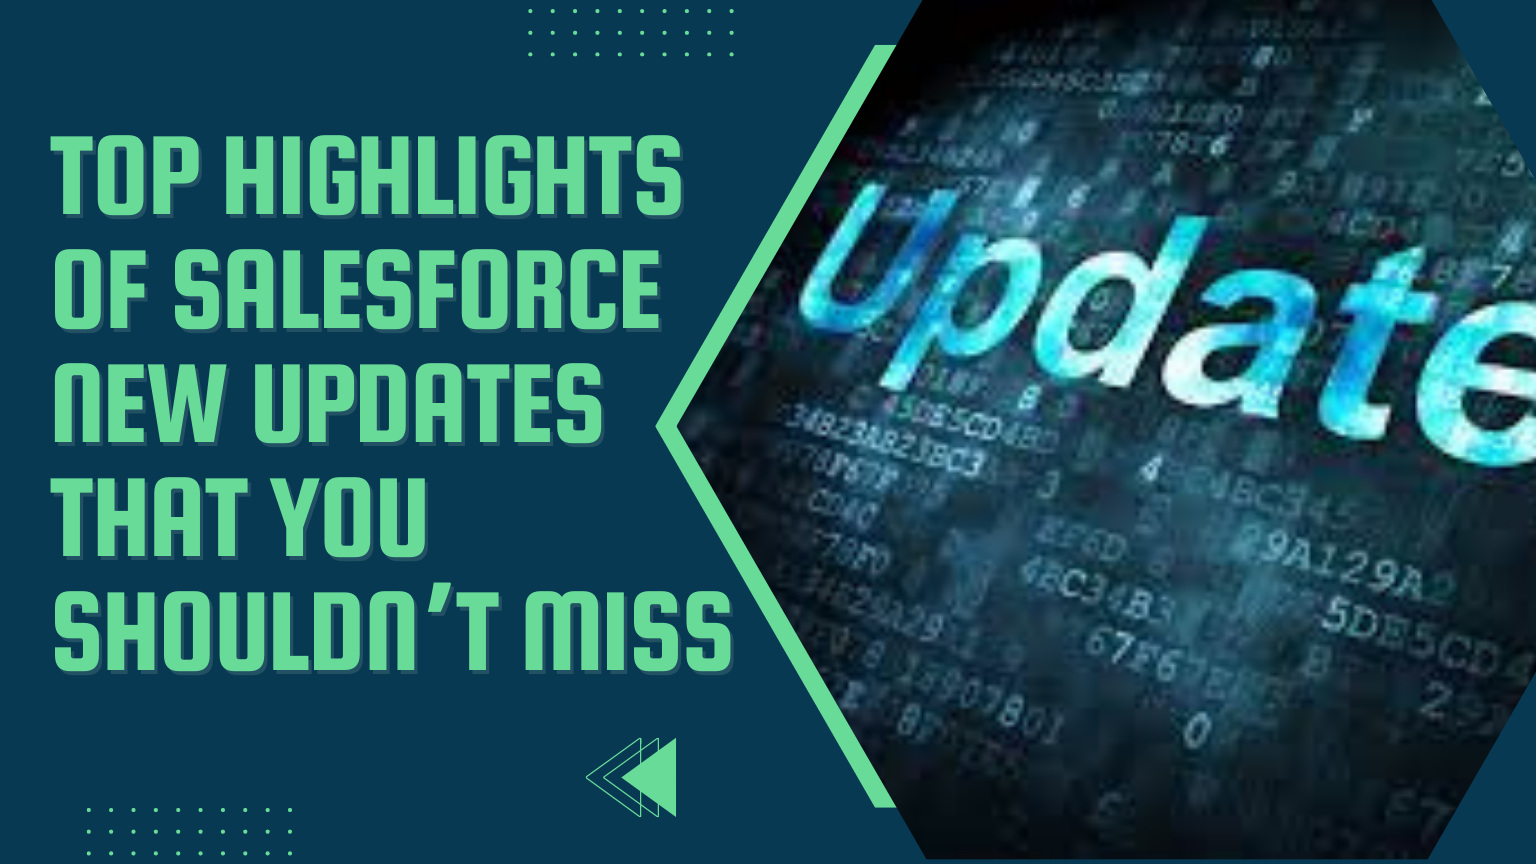 Top-Highlights-Of-Salesforce-New-Updates-That-You-Shouldnt-Miss